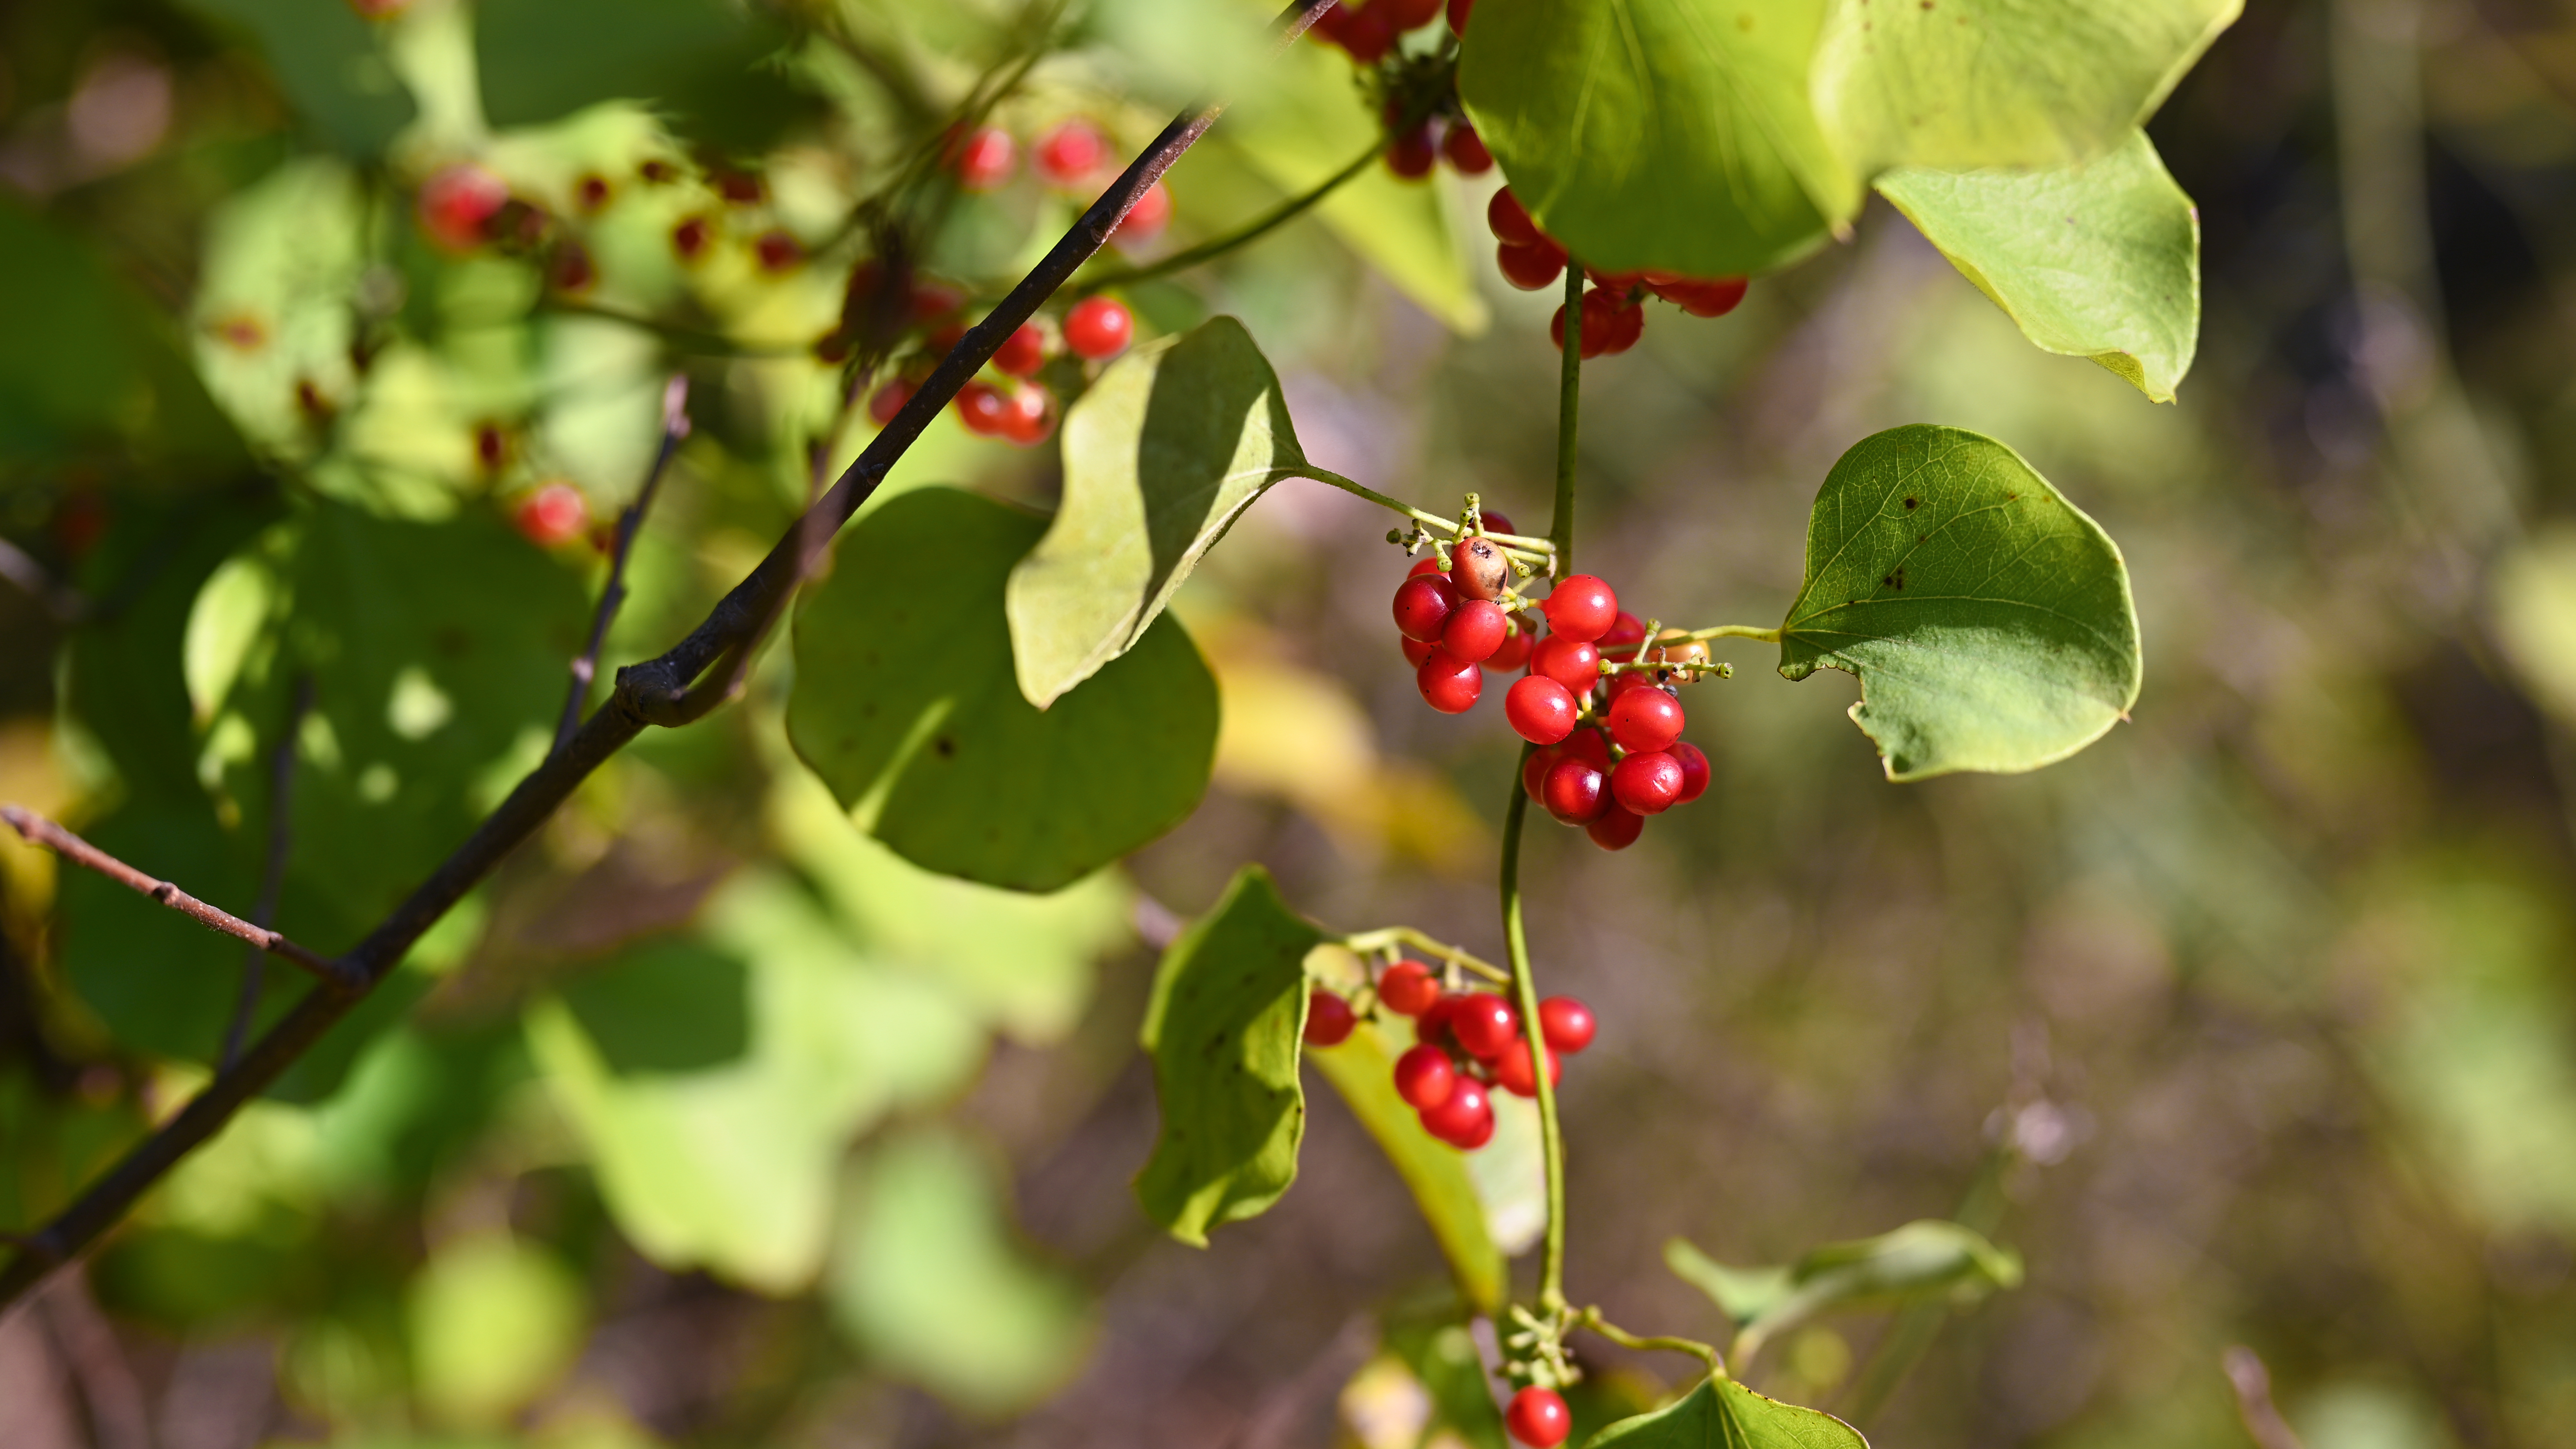 Nature Red Berries Plants Outdoors Fall Photography Harvest 5397x3036